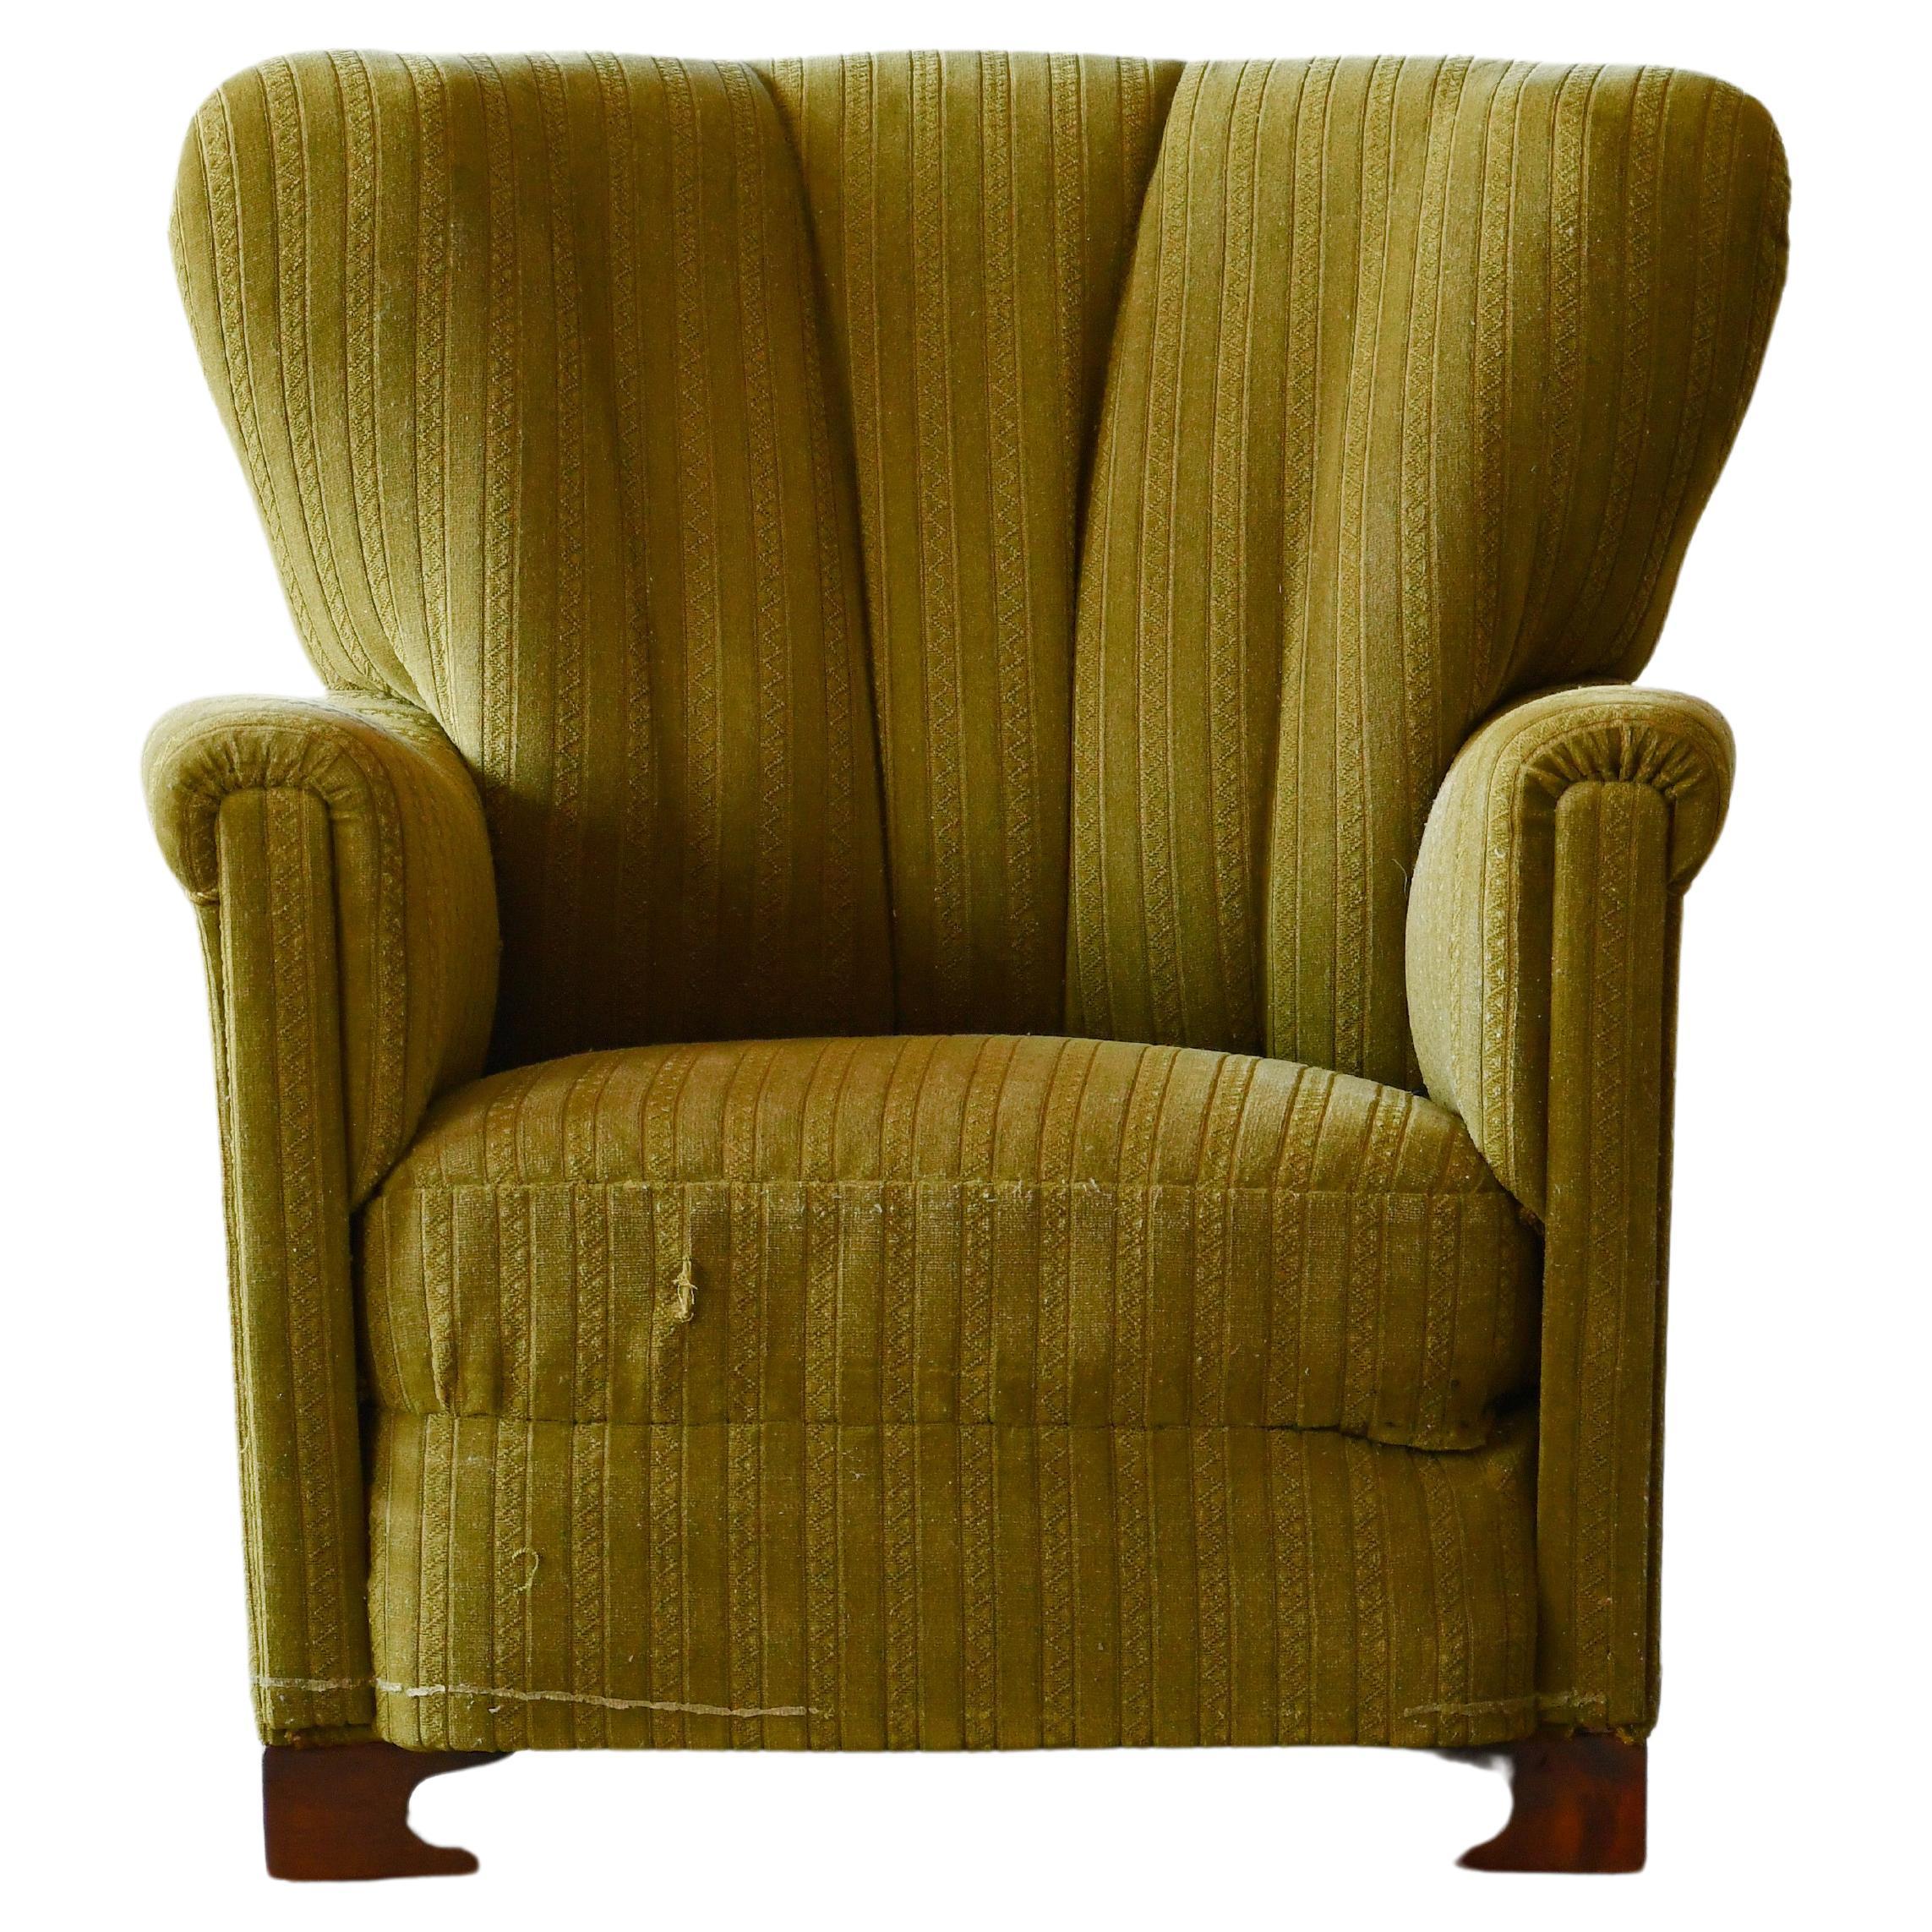 Danish 1940's Fritz Hansen Style Large Club Chair in Wool with Channel Back